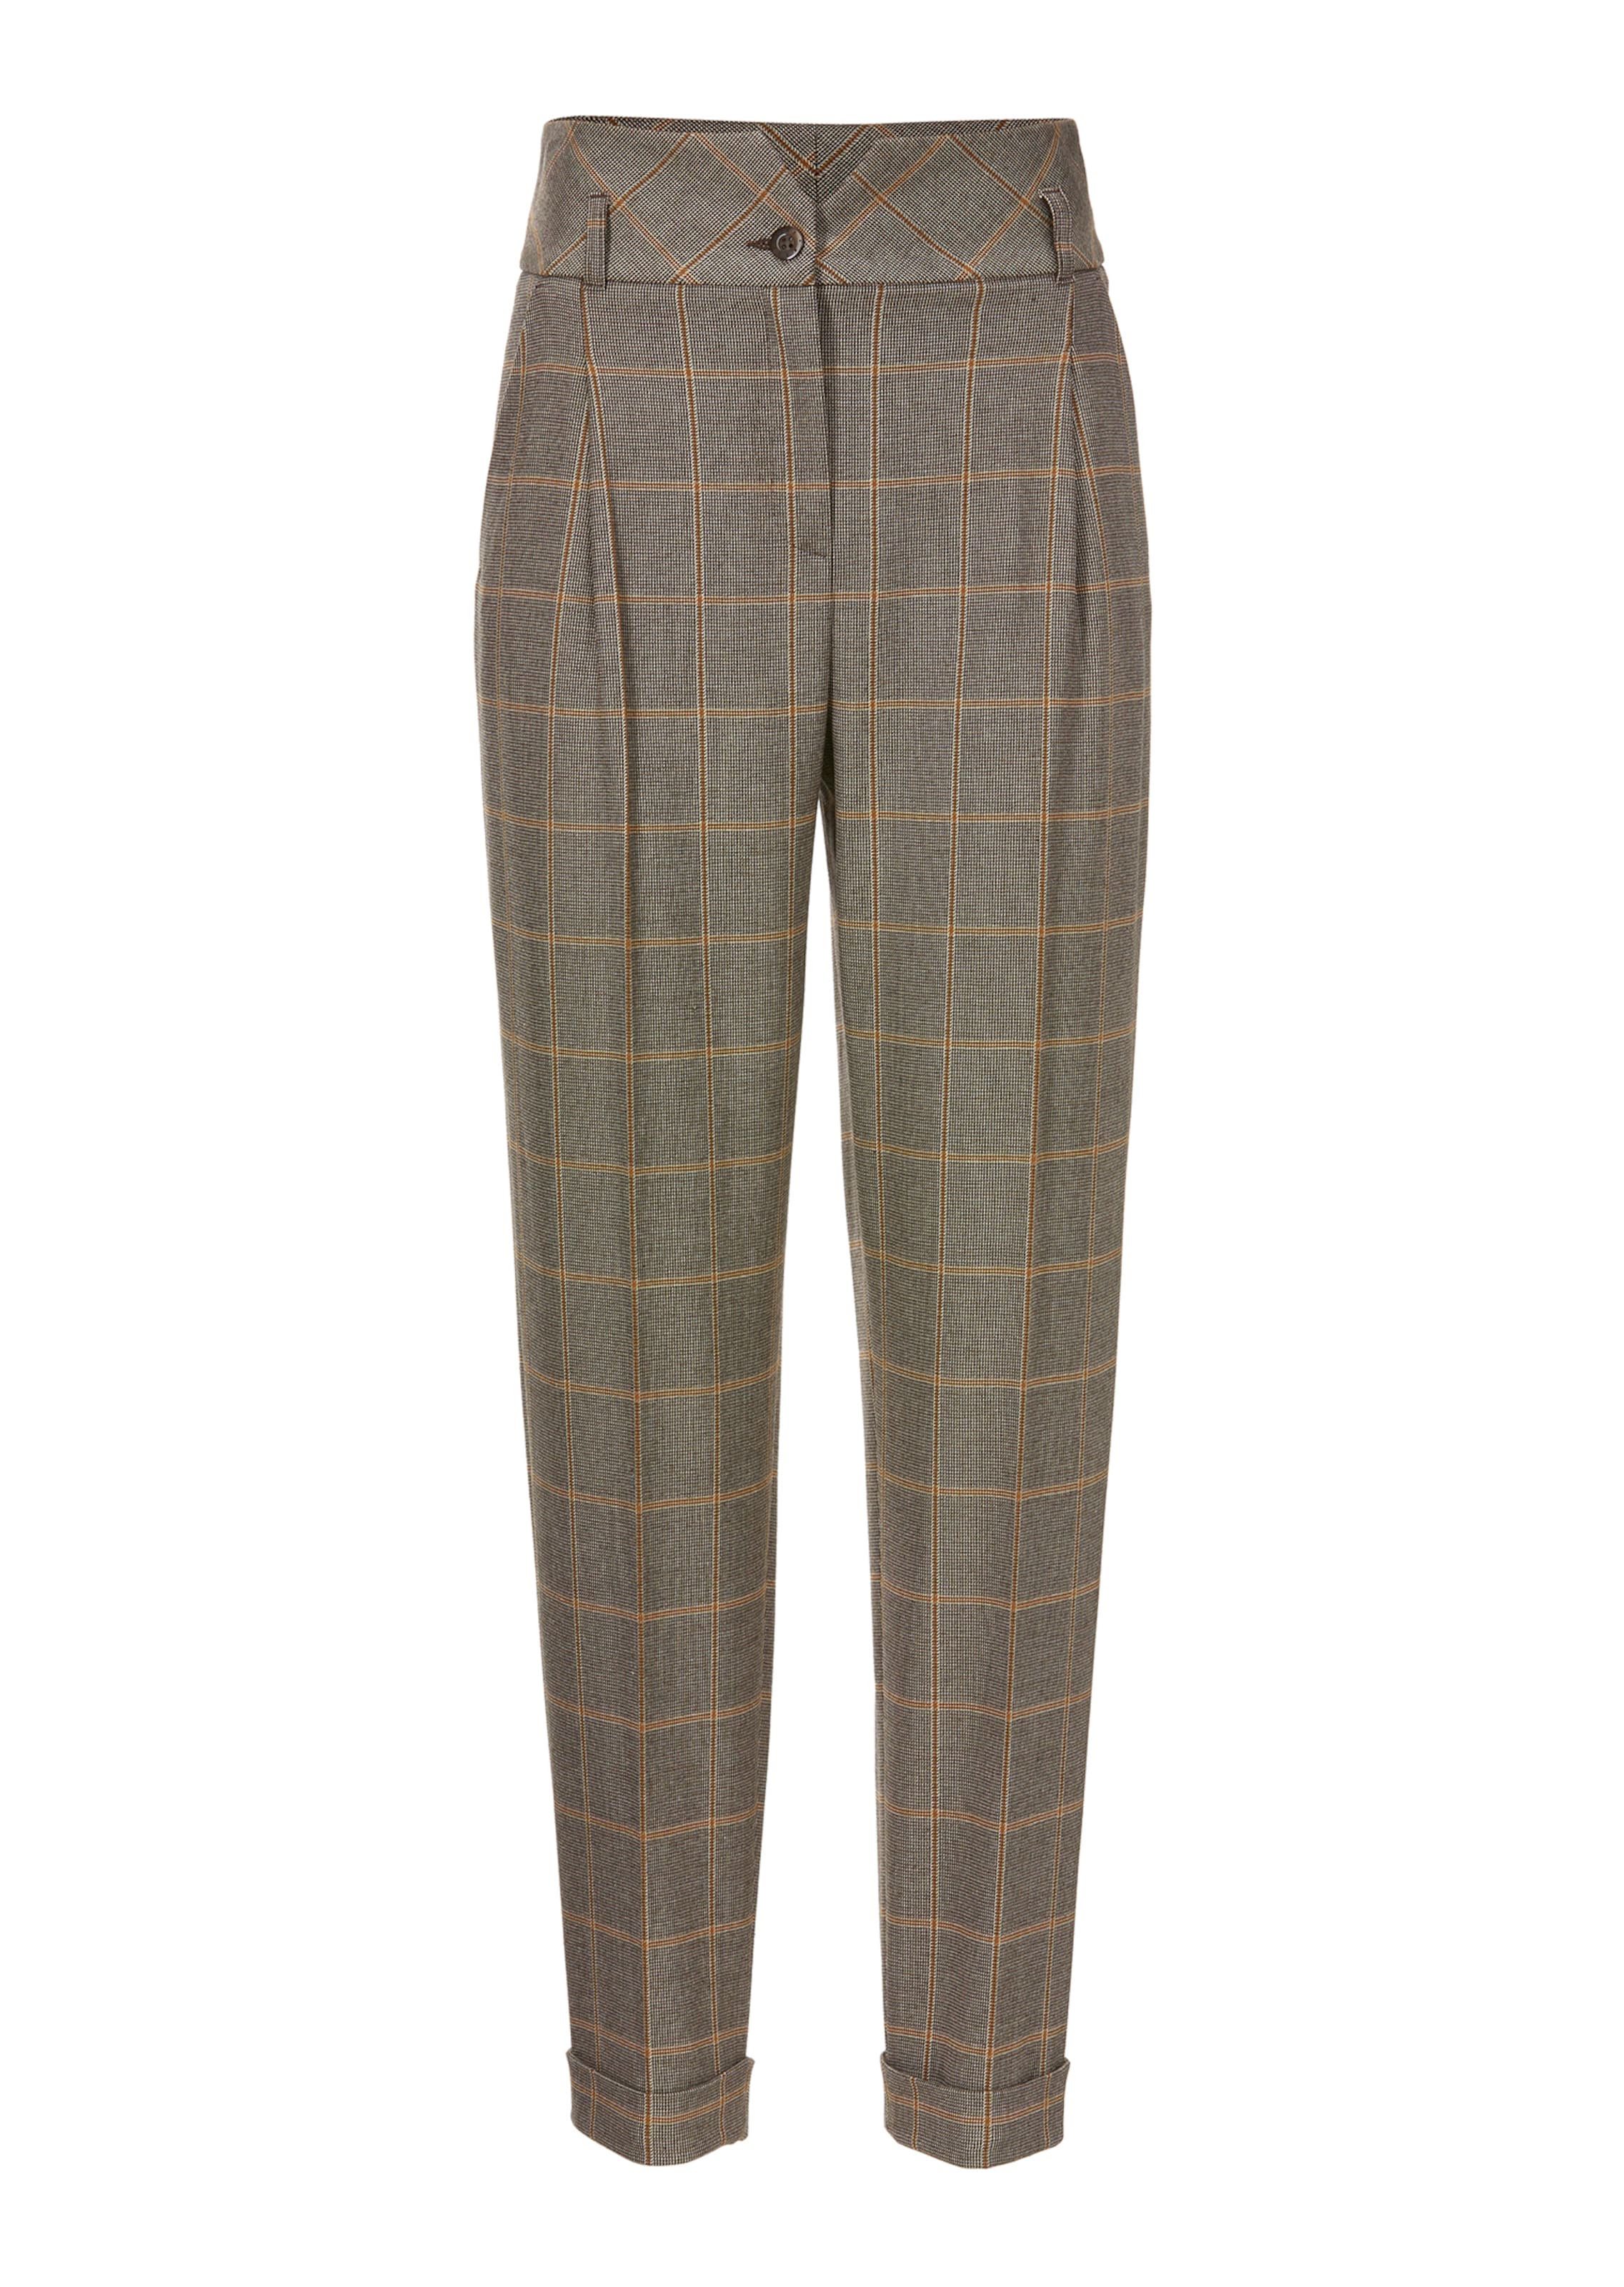 NWT Brunello Cucinelli Belted Wool Check Trousers Pants Plaid Windowpane  Gray 12 | eBay